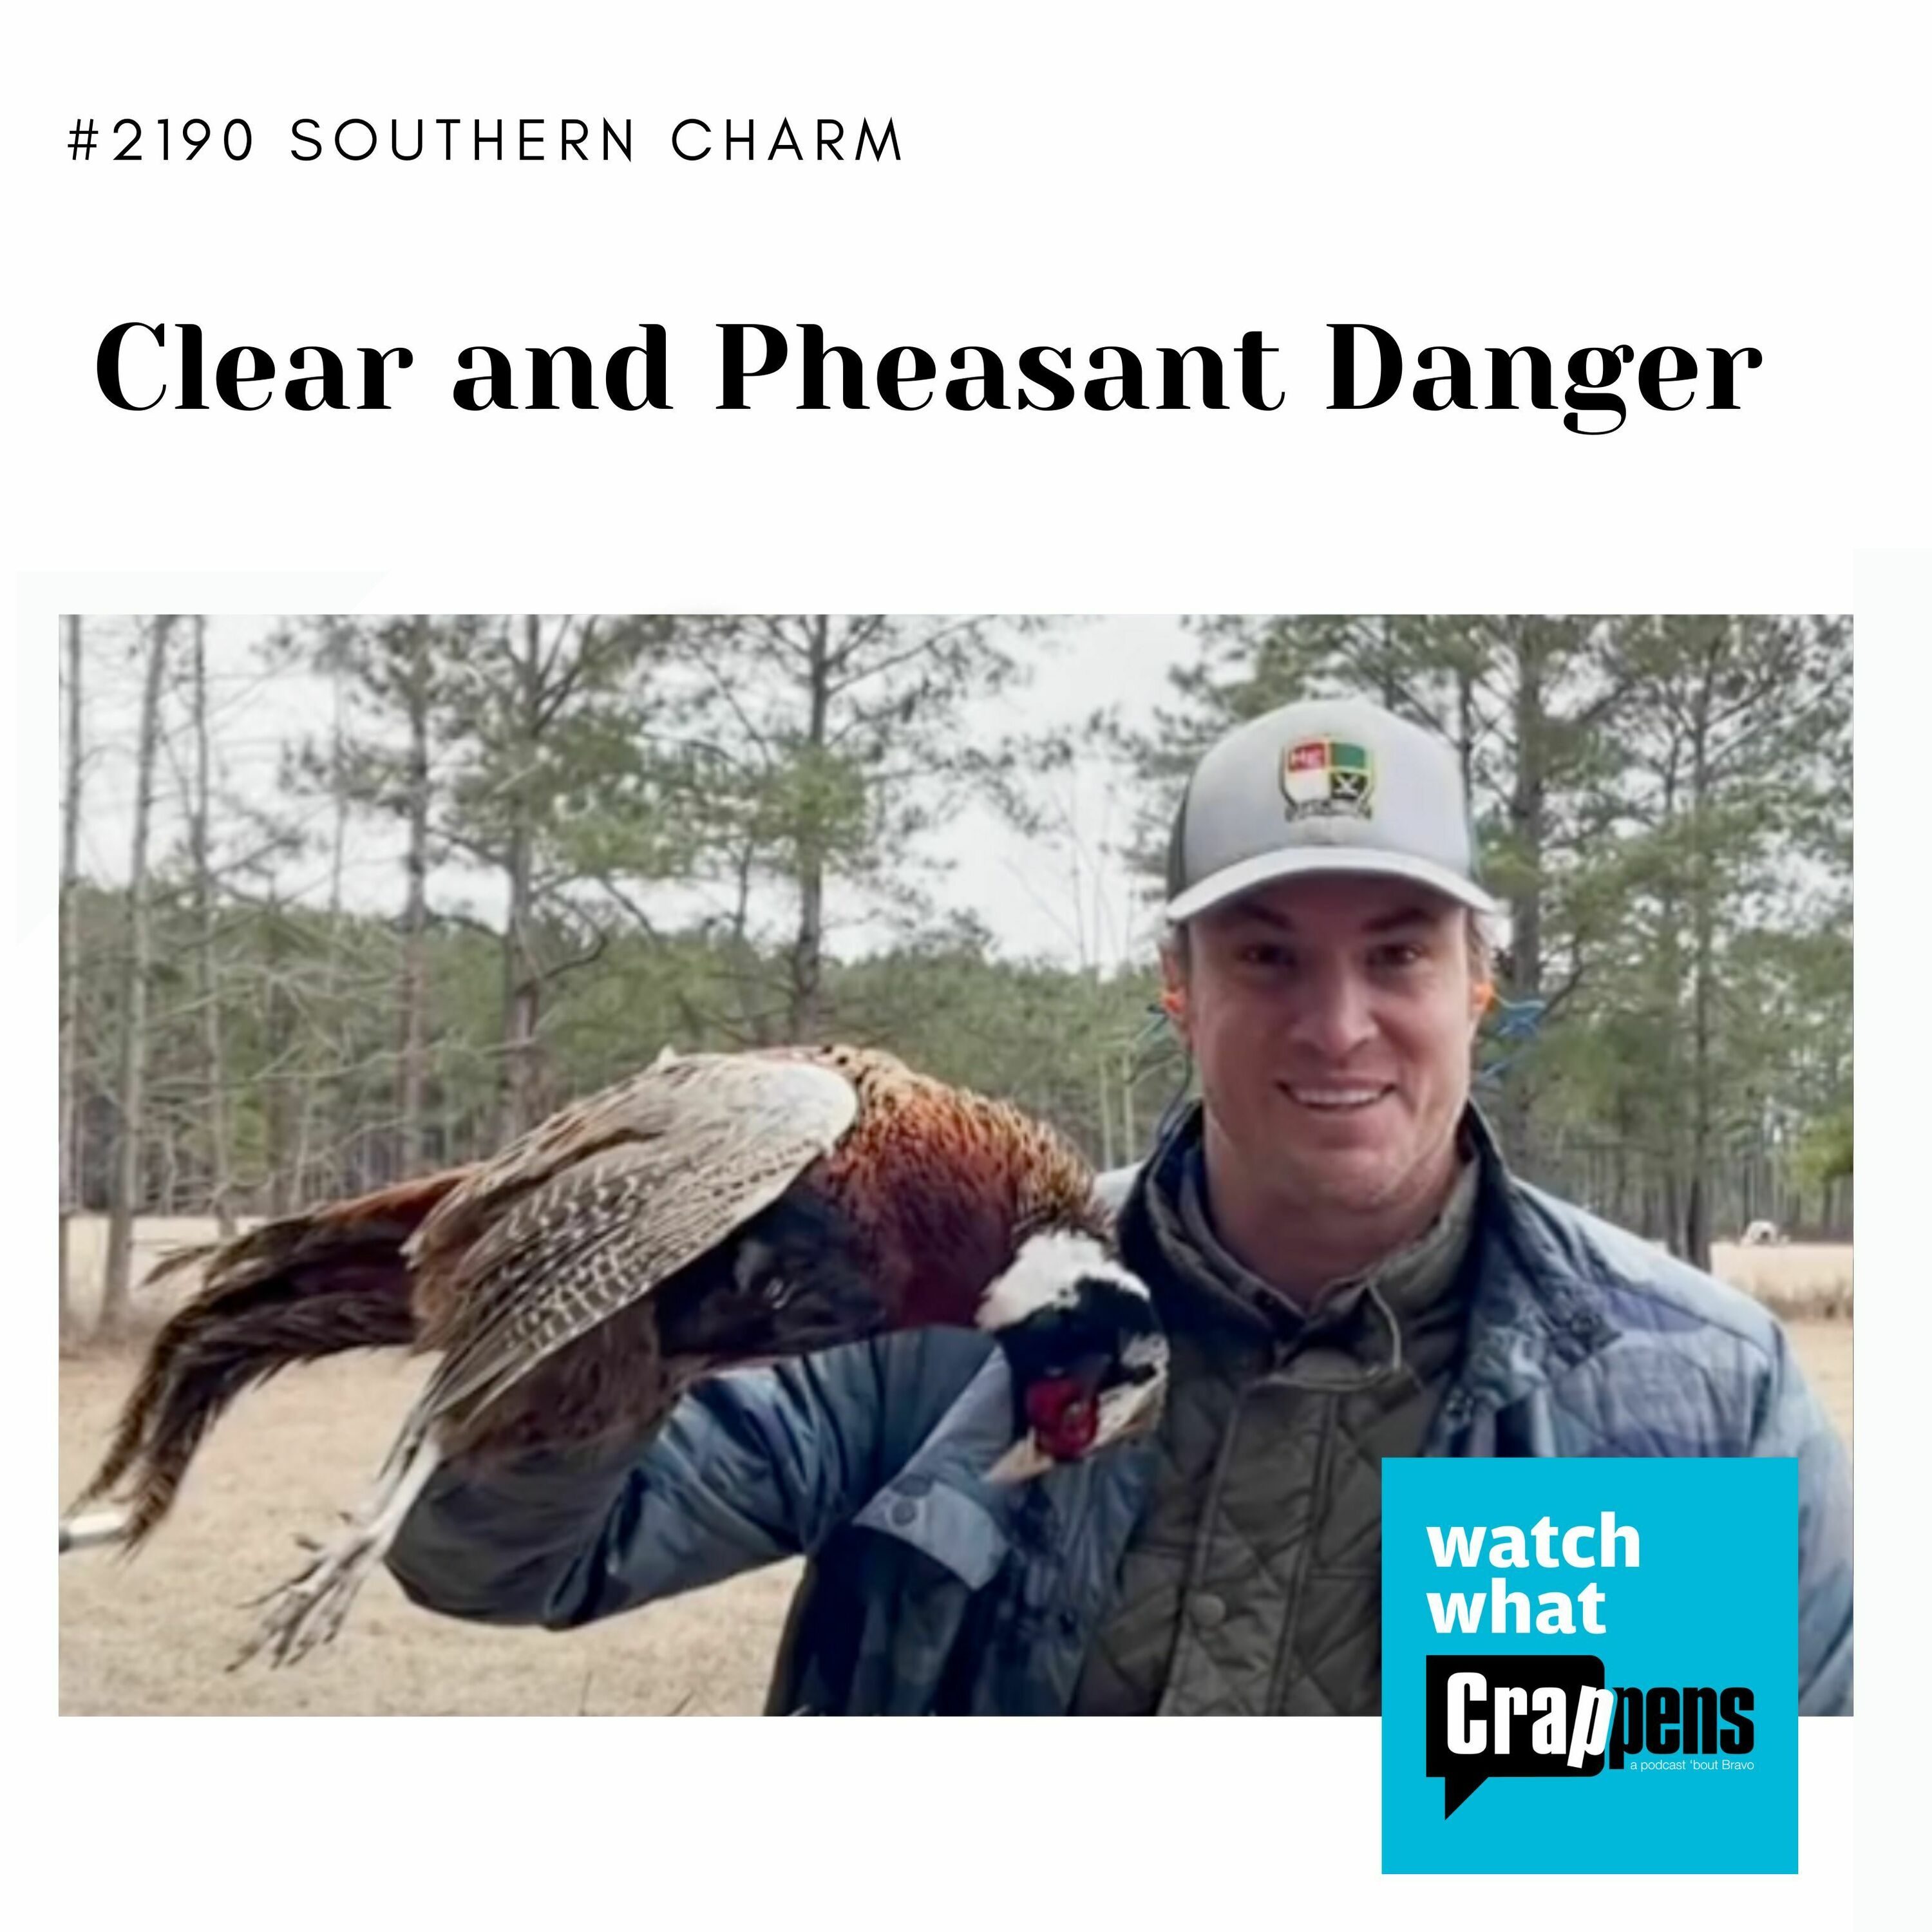 #2190 Southern Charm: Clear and Pheasant Danger